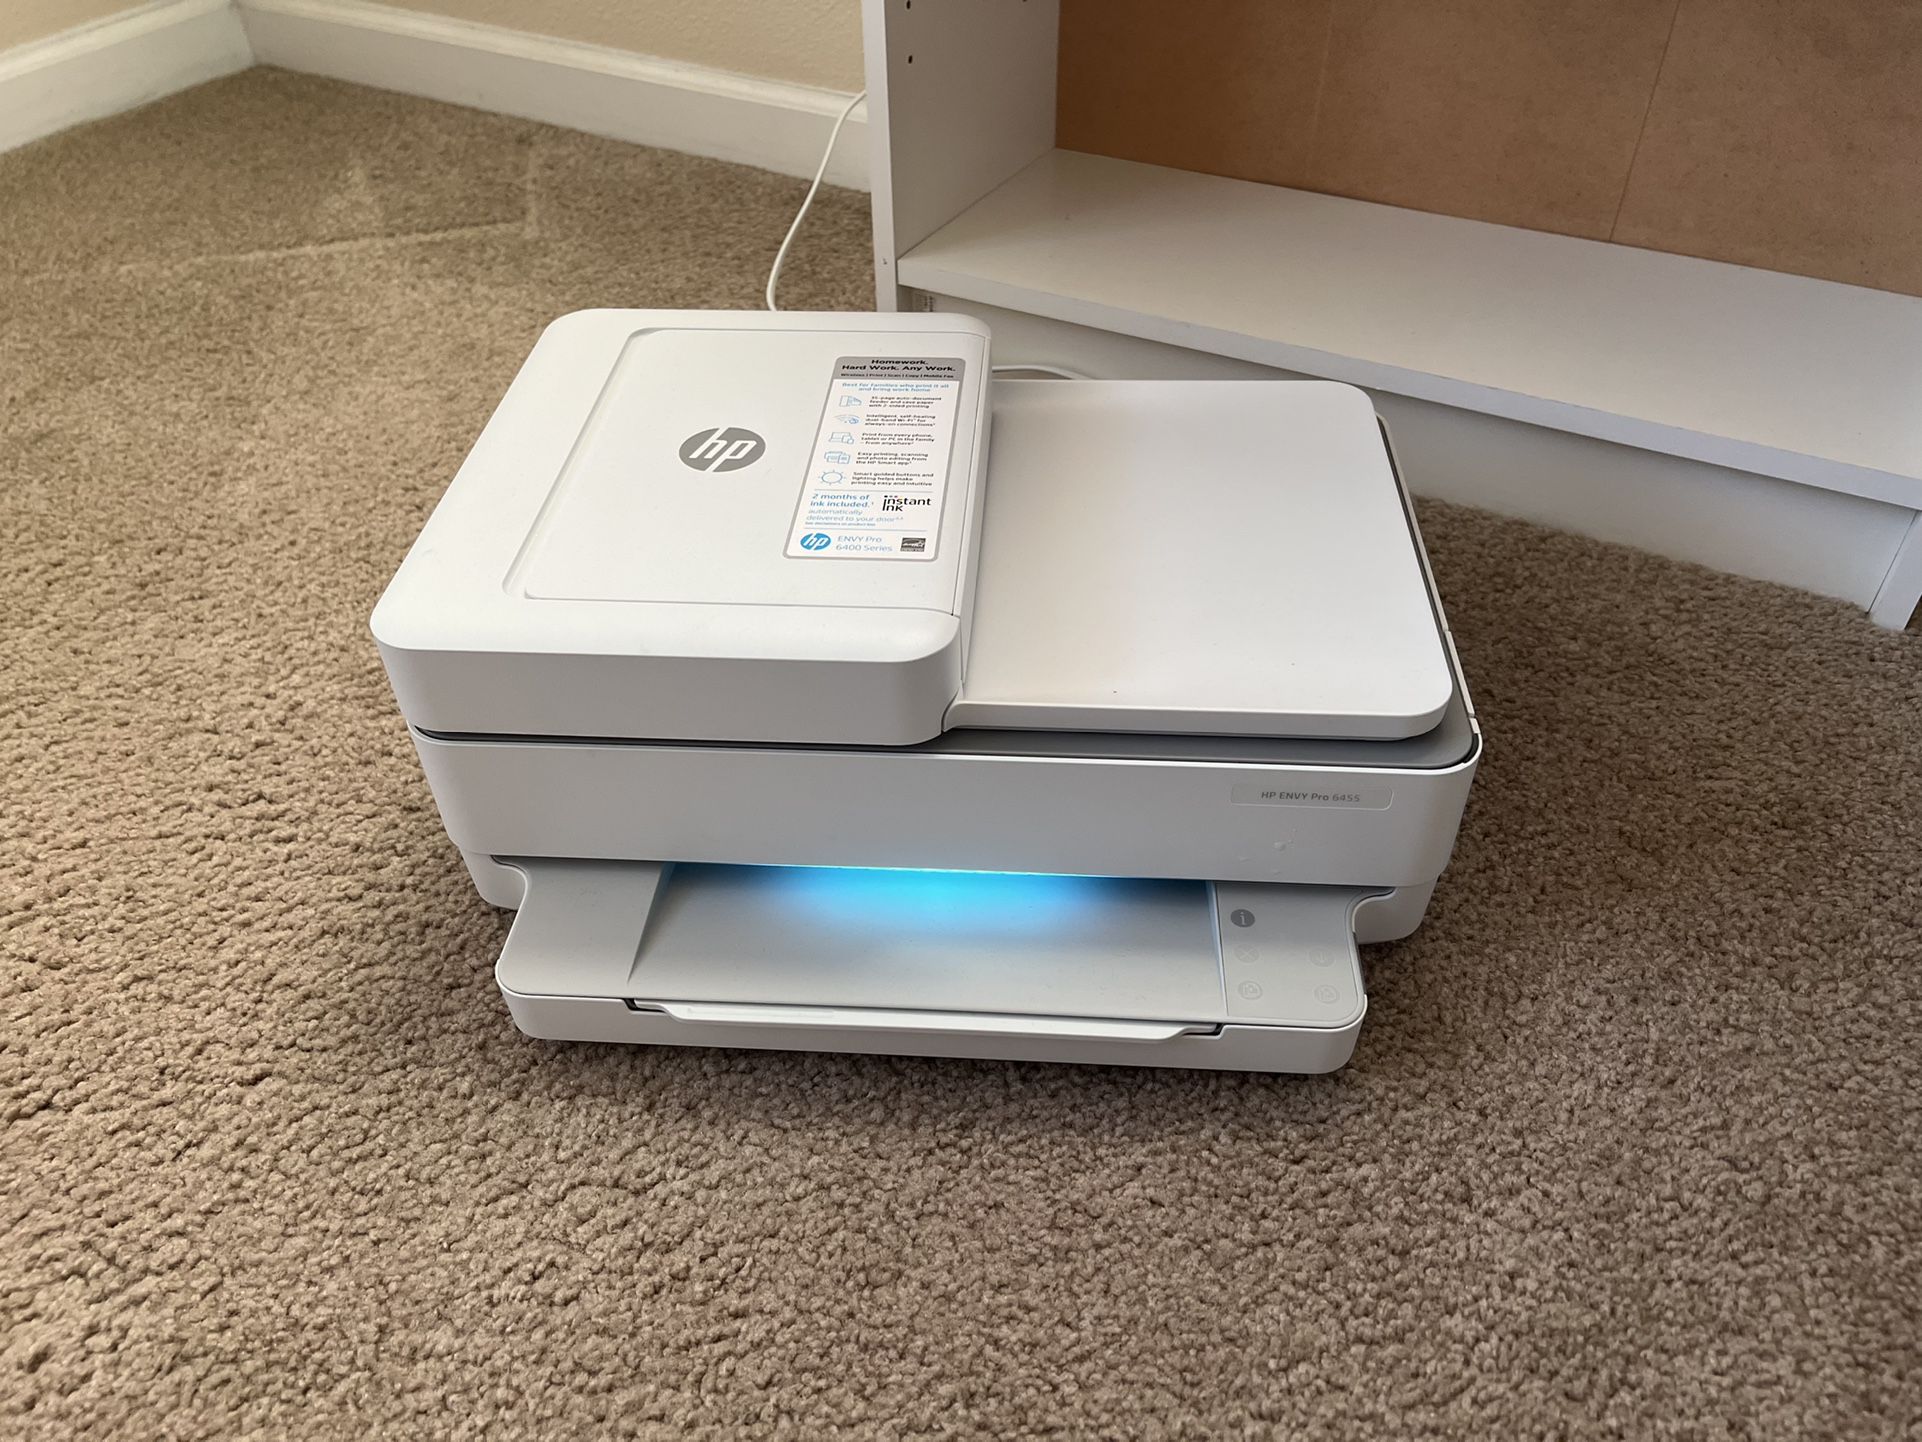 HP ENVY Pro 6455 Wireless All-in-One Printer